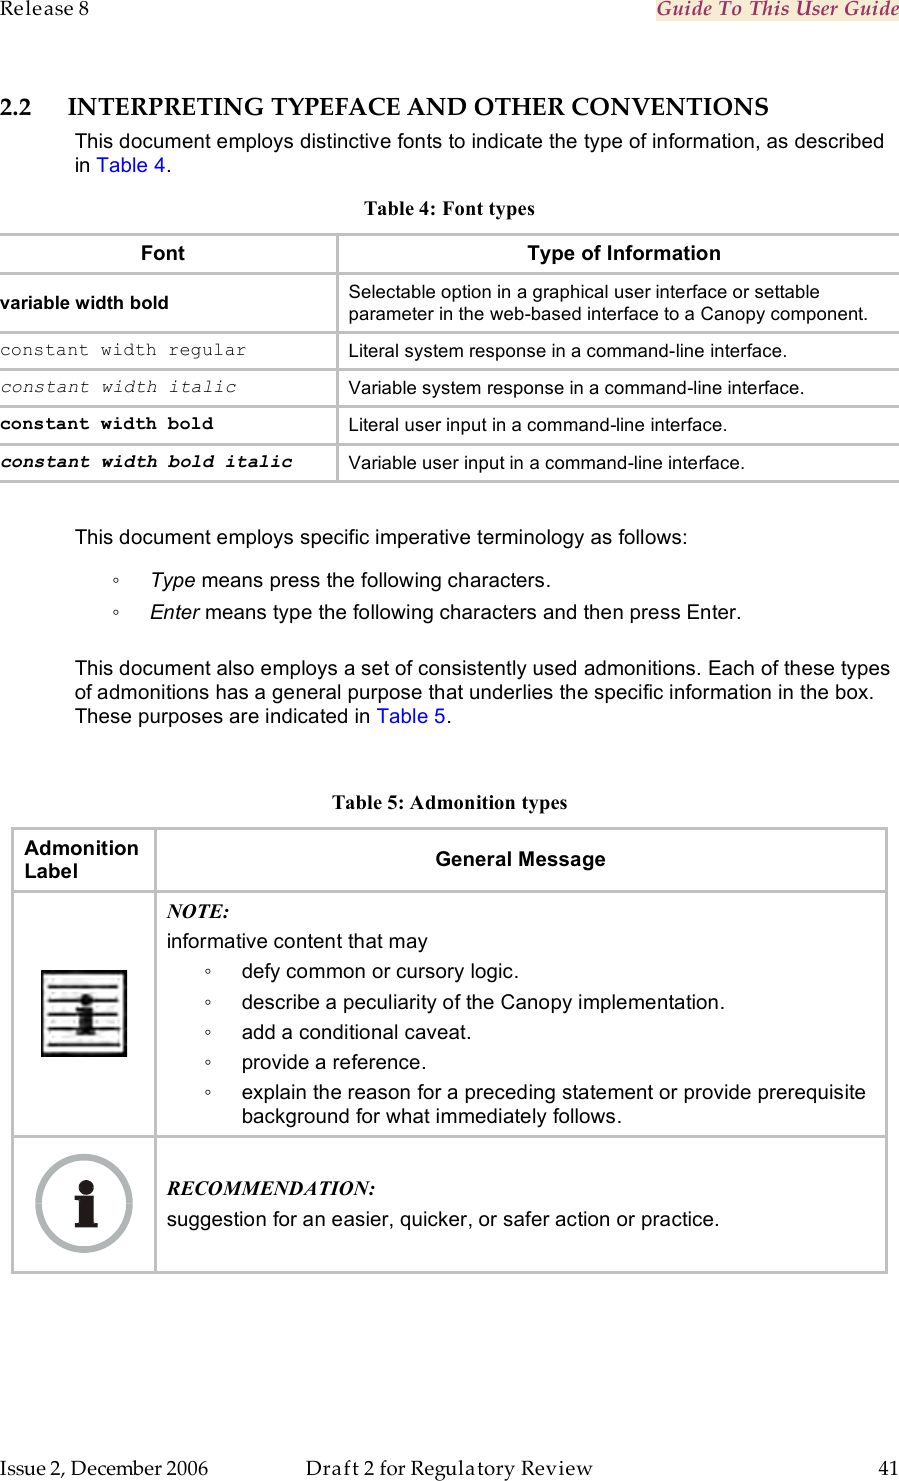 Release 8    Guide To This User Guide                  March 200                  Through Software Release 6.   Issue 2, December 2006  Draft 2 for Regulatory Review  41     2.2 INTERPRETING TYPEFACE AND OTHER CONVENTIONS This document employs distinctive fonts to indicate the type of information, as described in Table 4. Table 4: Font types Font Type of Information variable width bold Selectable option in a graphical user interface or settable parameter in the web-based interface to a Canopy component. constant width regular Literal system response in a command-line interface. constant width italic Variable system response in a command-line interface. constant width bold Literal user input in a command-line interface. constant width bold italic Variable user input in a command-line interface.  This document employs specific imperative terminology as follows: ◦ Type means press the following characters. ◦ Enter means type the following characters and then press Enter.  This document also employs a set of consistently used admonitions. Each of these types of admonitions has a general purpose that underlies the specific information in the box. These purposes are indicated in Table 5.  Table 5: Admonition types Admonition Label General Message  NOTE: informative content that may ◦  defy common or cursory logic. ◦  describe a peculiarity of the Canopy implementation. ◦  add a conditional caveat. ◦  provide a reference. ◦  explain the reason for a preceding statement or provide prerequisite background for what immediately follows.  RECOMMENDATION: suggestion for an easier, quicker, or safer action or practice. 